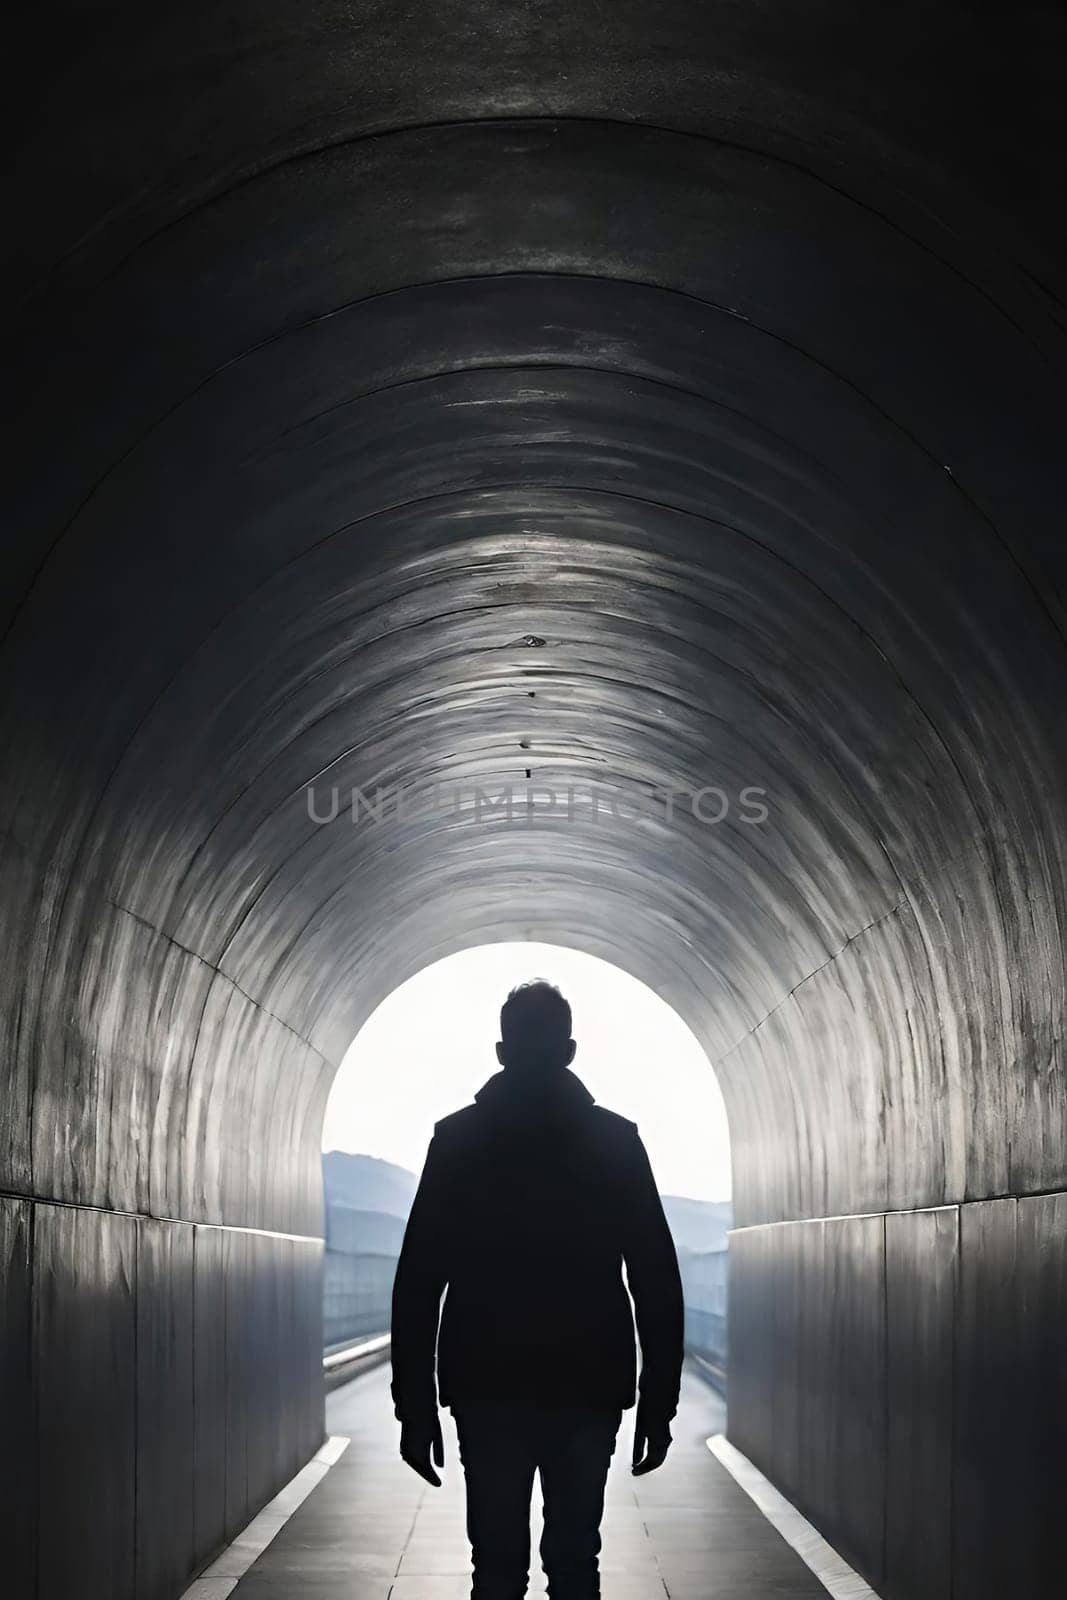 Silhouette of a man in a dark tunnel. Conceptual image. Business concept.Silhouette of a man standing in a dark tunnel with light.Silhouette of a man walking through a tunnel with light coming through.Man standing in a tunnel looking at the light coming from the end.